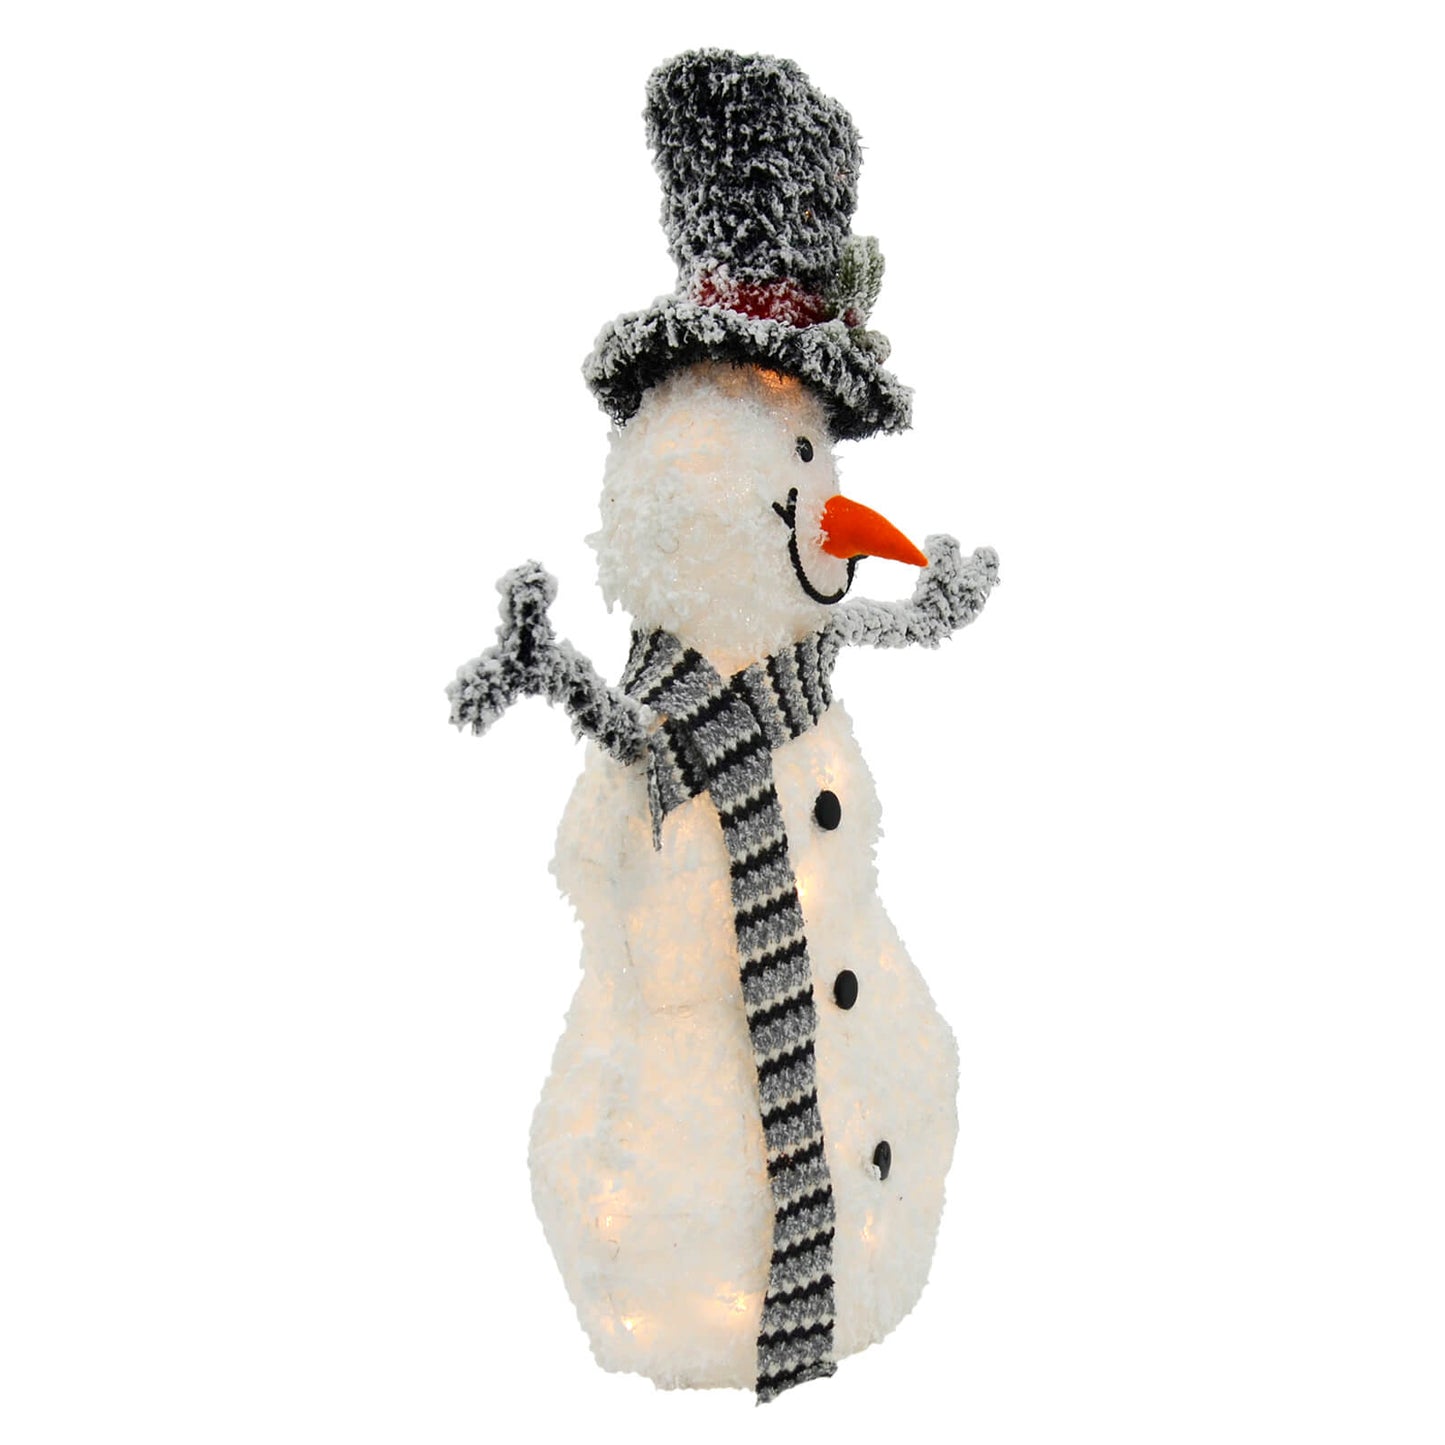 Side view of LED snowman Christmas decoration made from glitter snow, with top hat, pine cones, knitted grey scarf, felt nose and lit by warm white LED lights